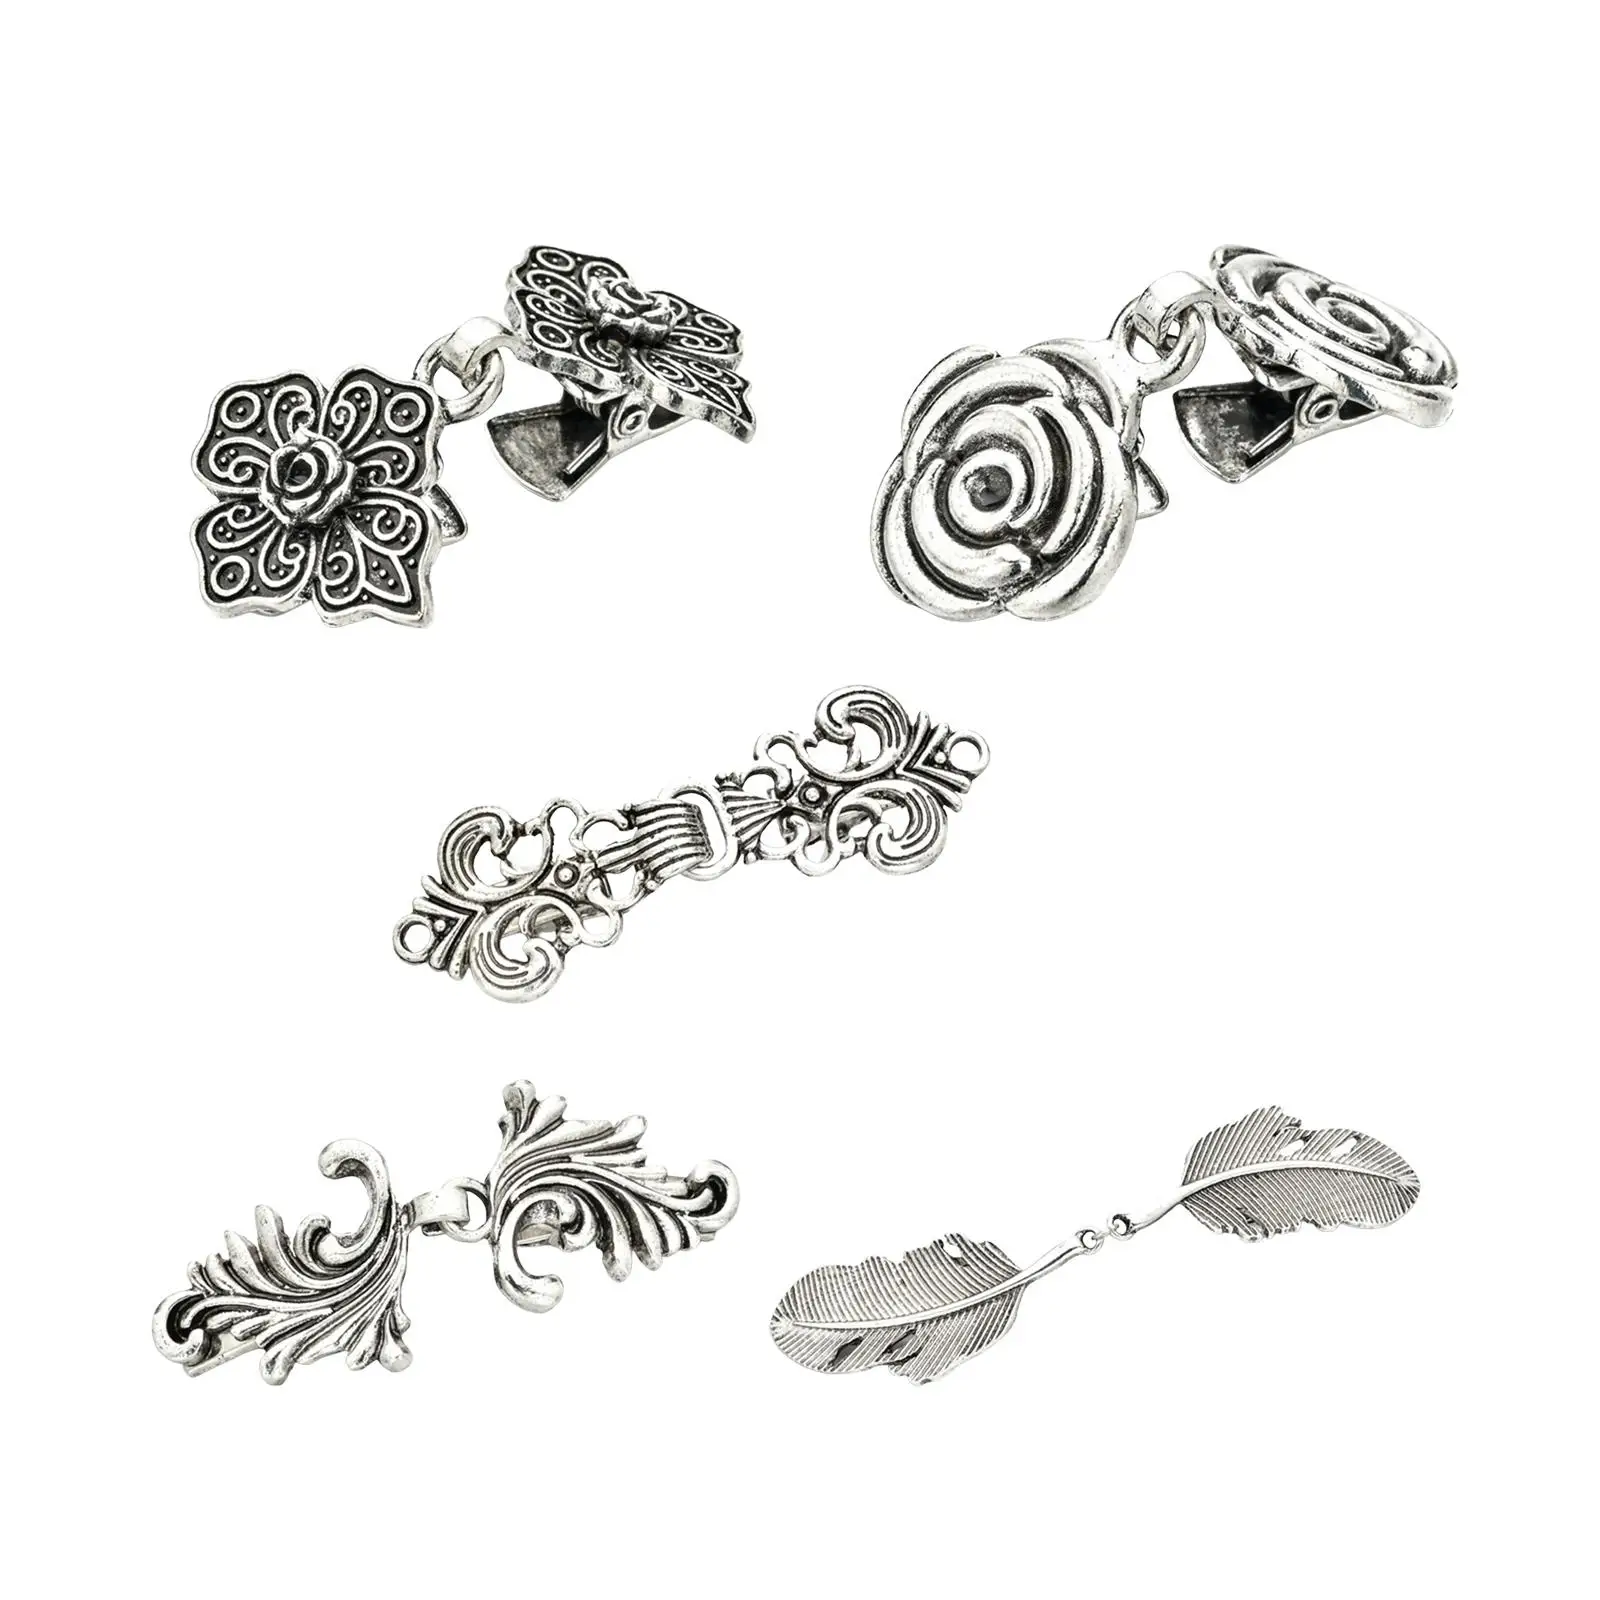 5 Pieces Sweater Brooch Clip Vintage Alloy 5 Styles Duck Clip Fashion Sweater Clips for Cloak Girls wearing Clothes Coat Scarf